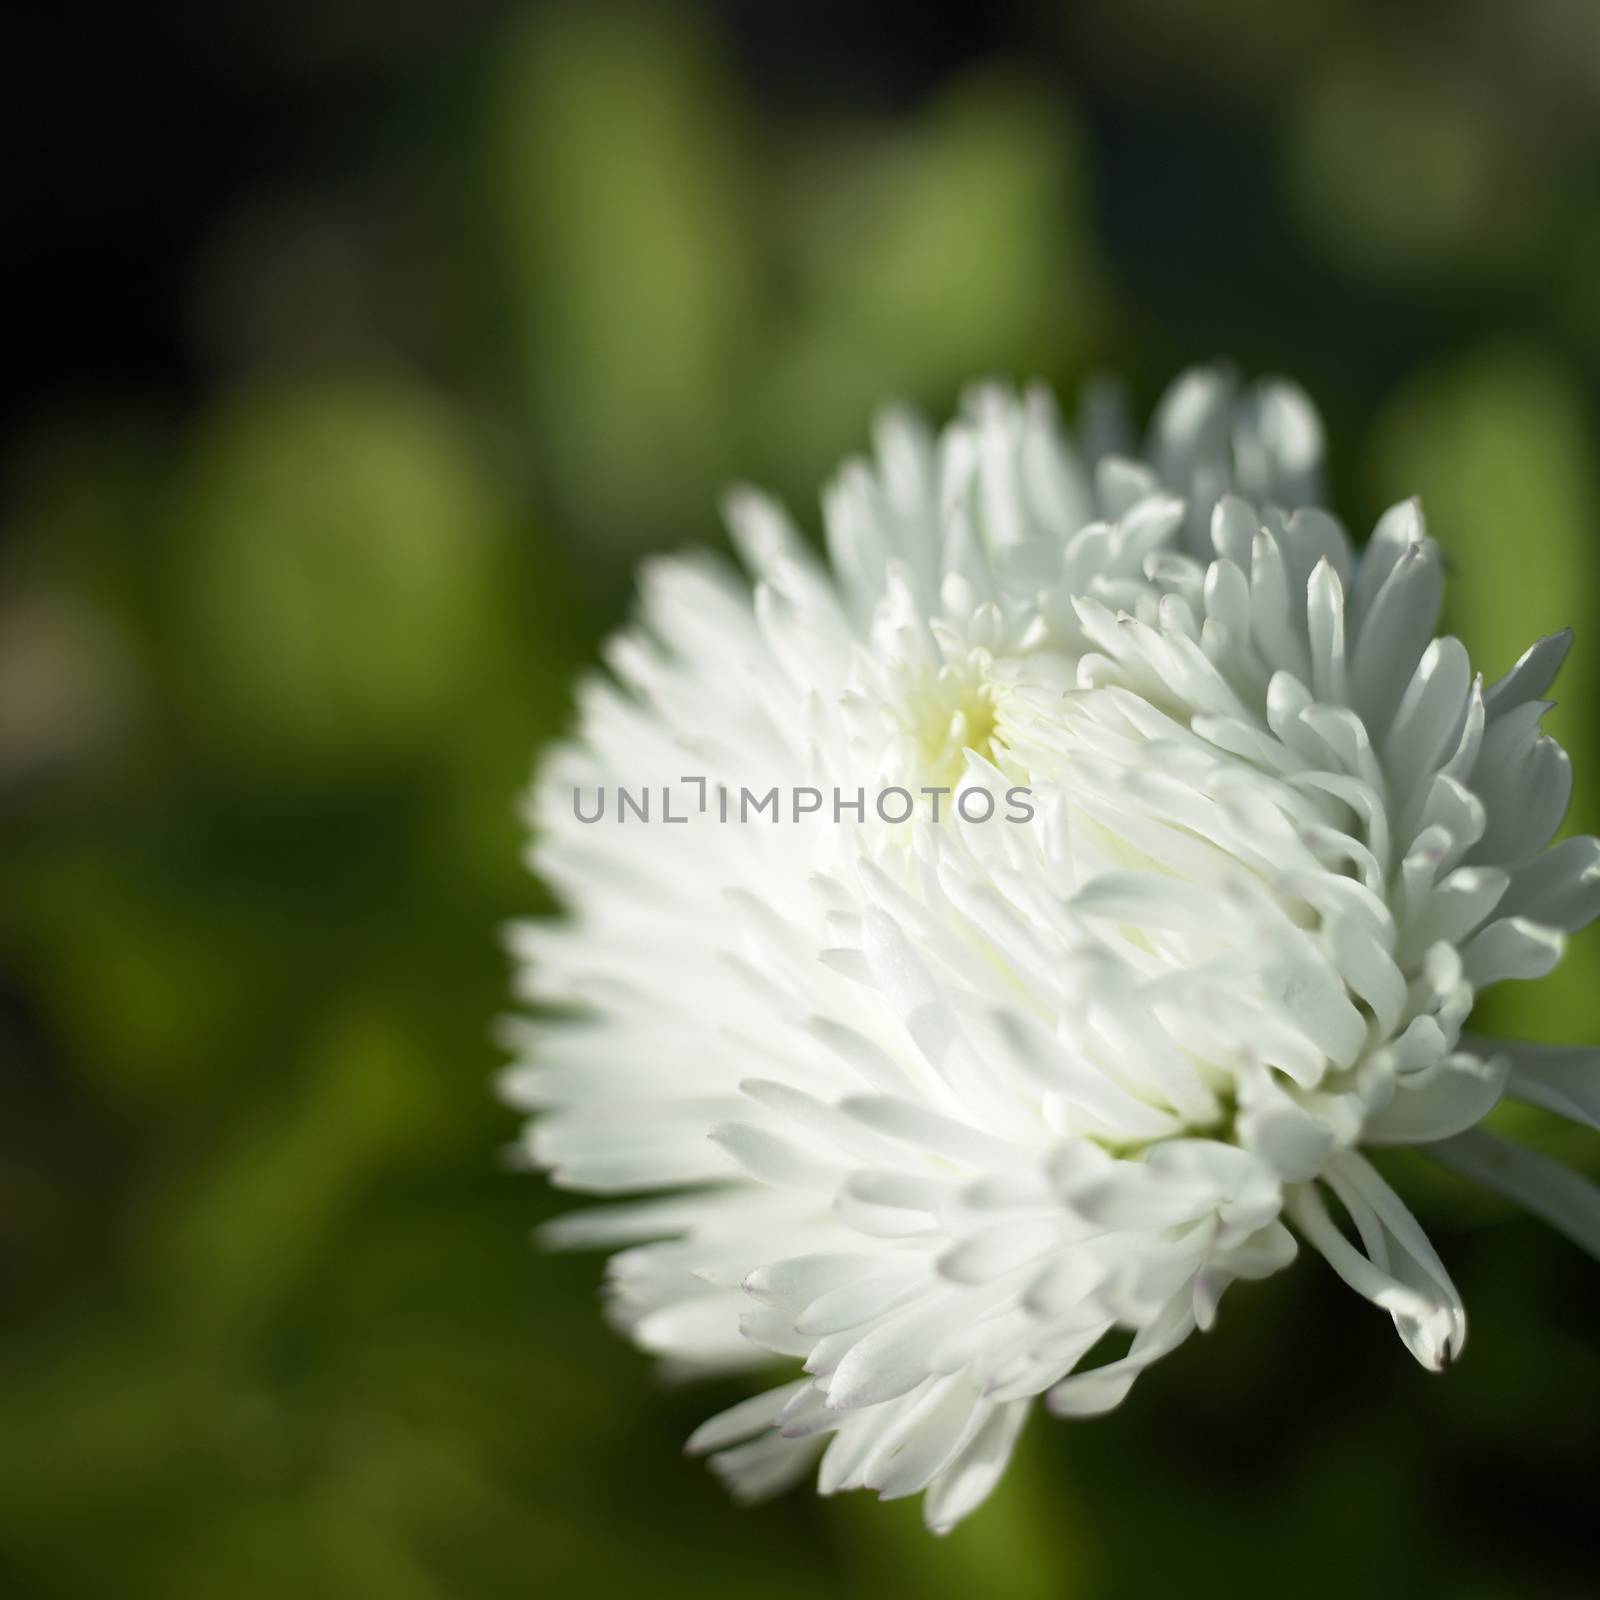 Tiny soft white petals of an English daisy flower in full bloom